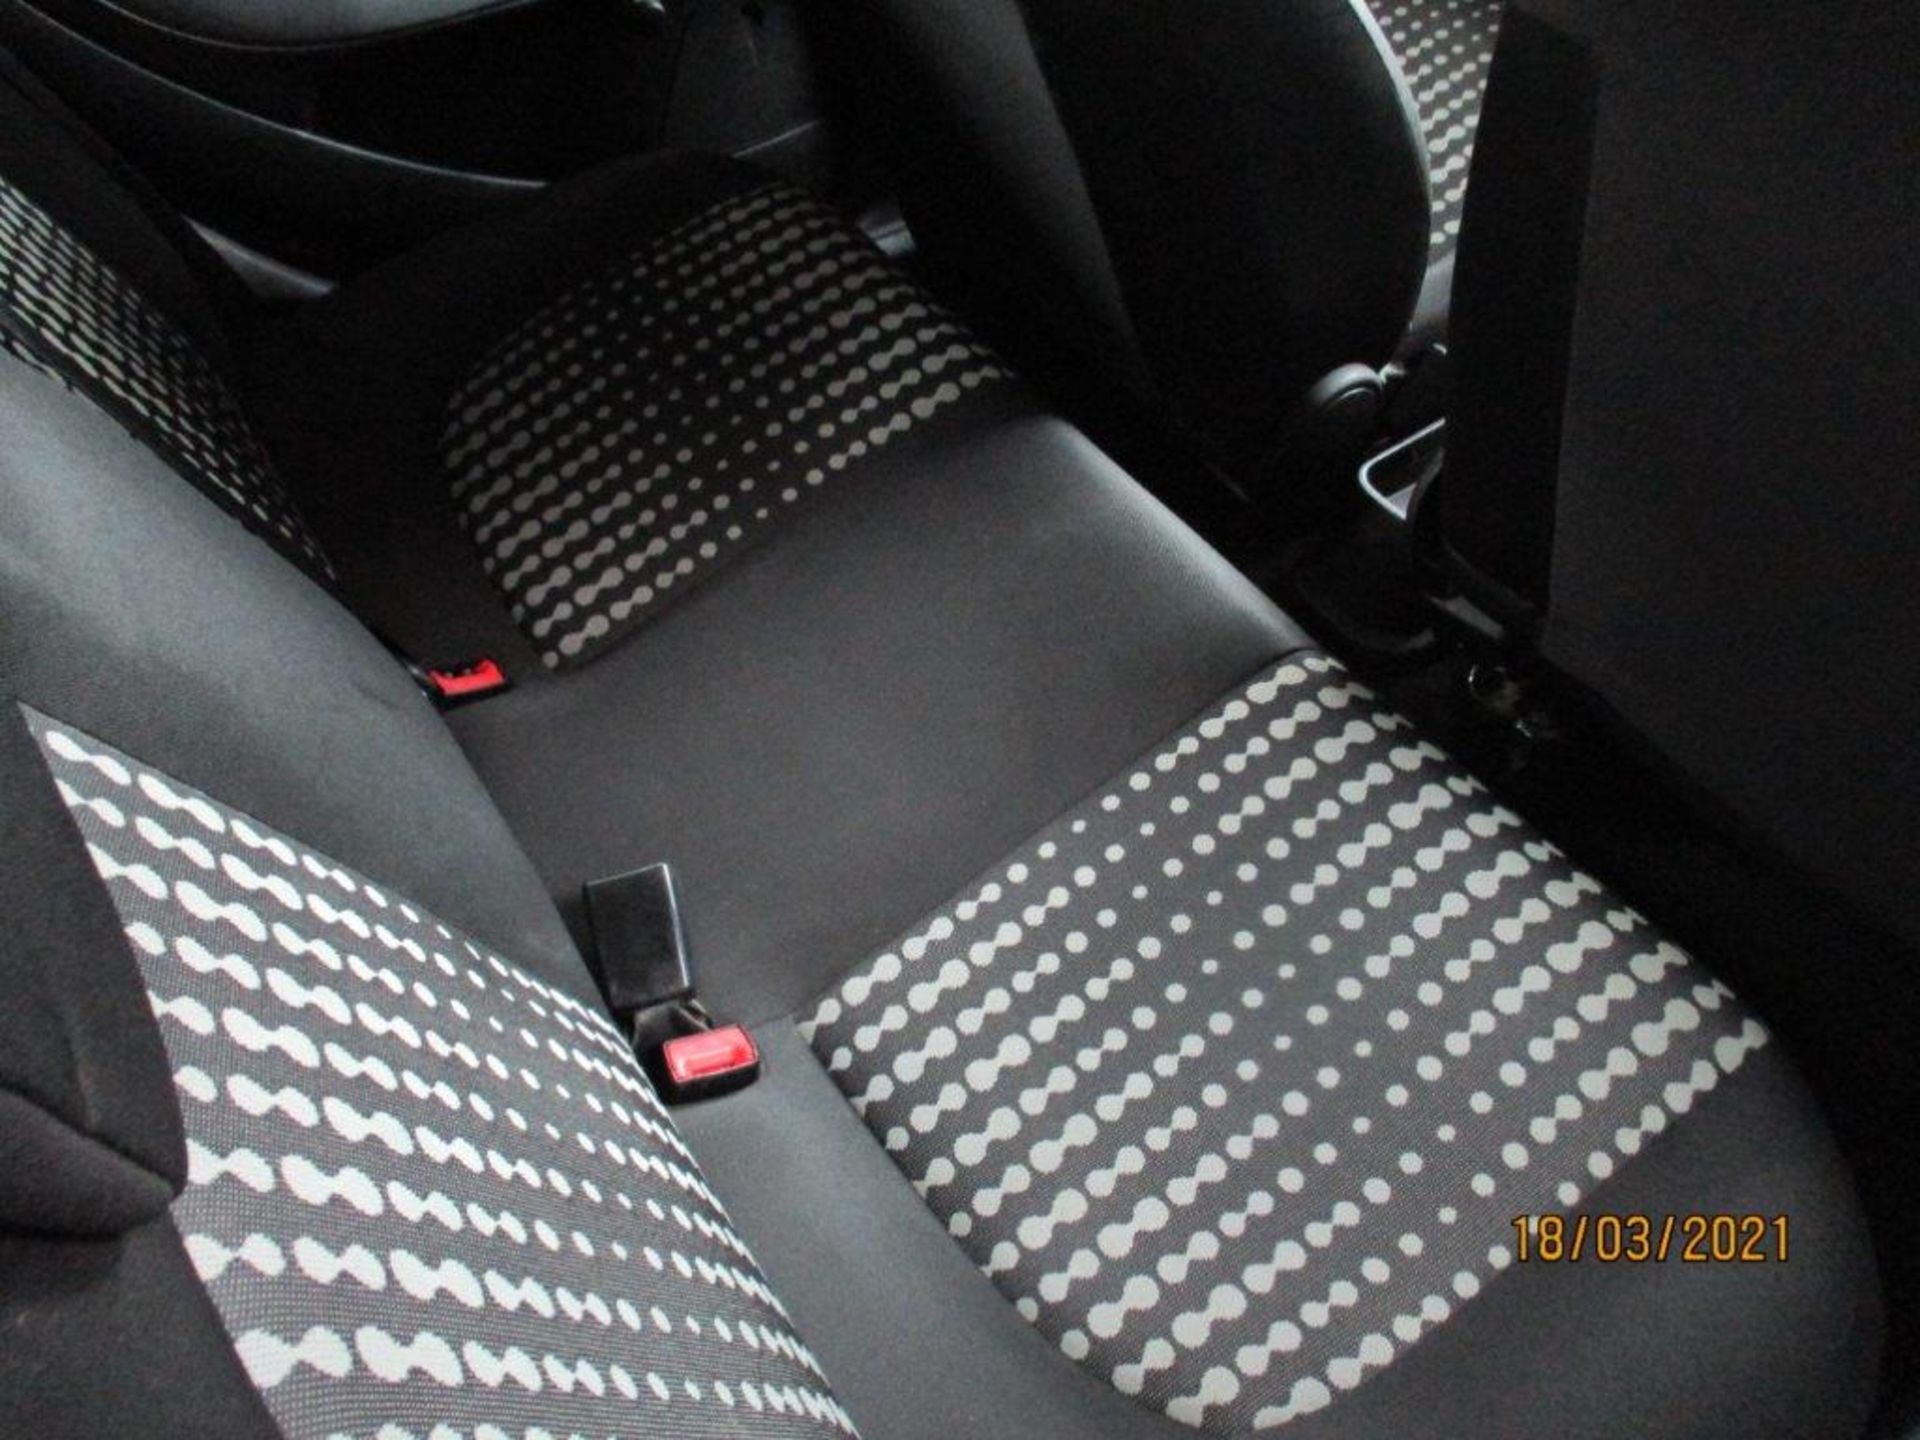 06 06 Fiat Punto Active - Image 16 of 19